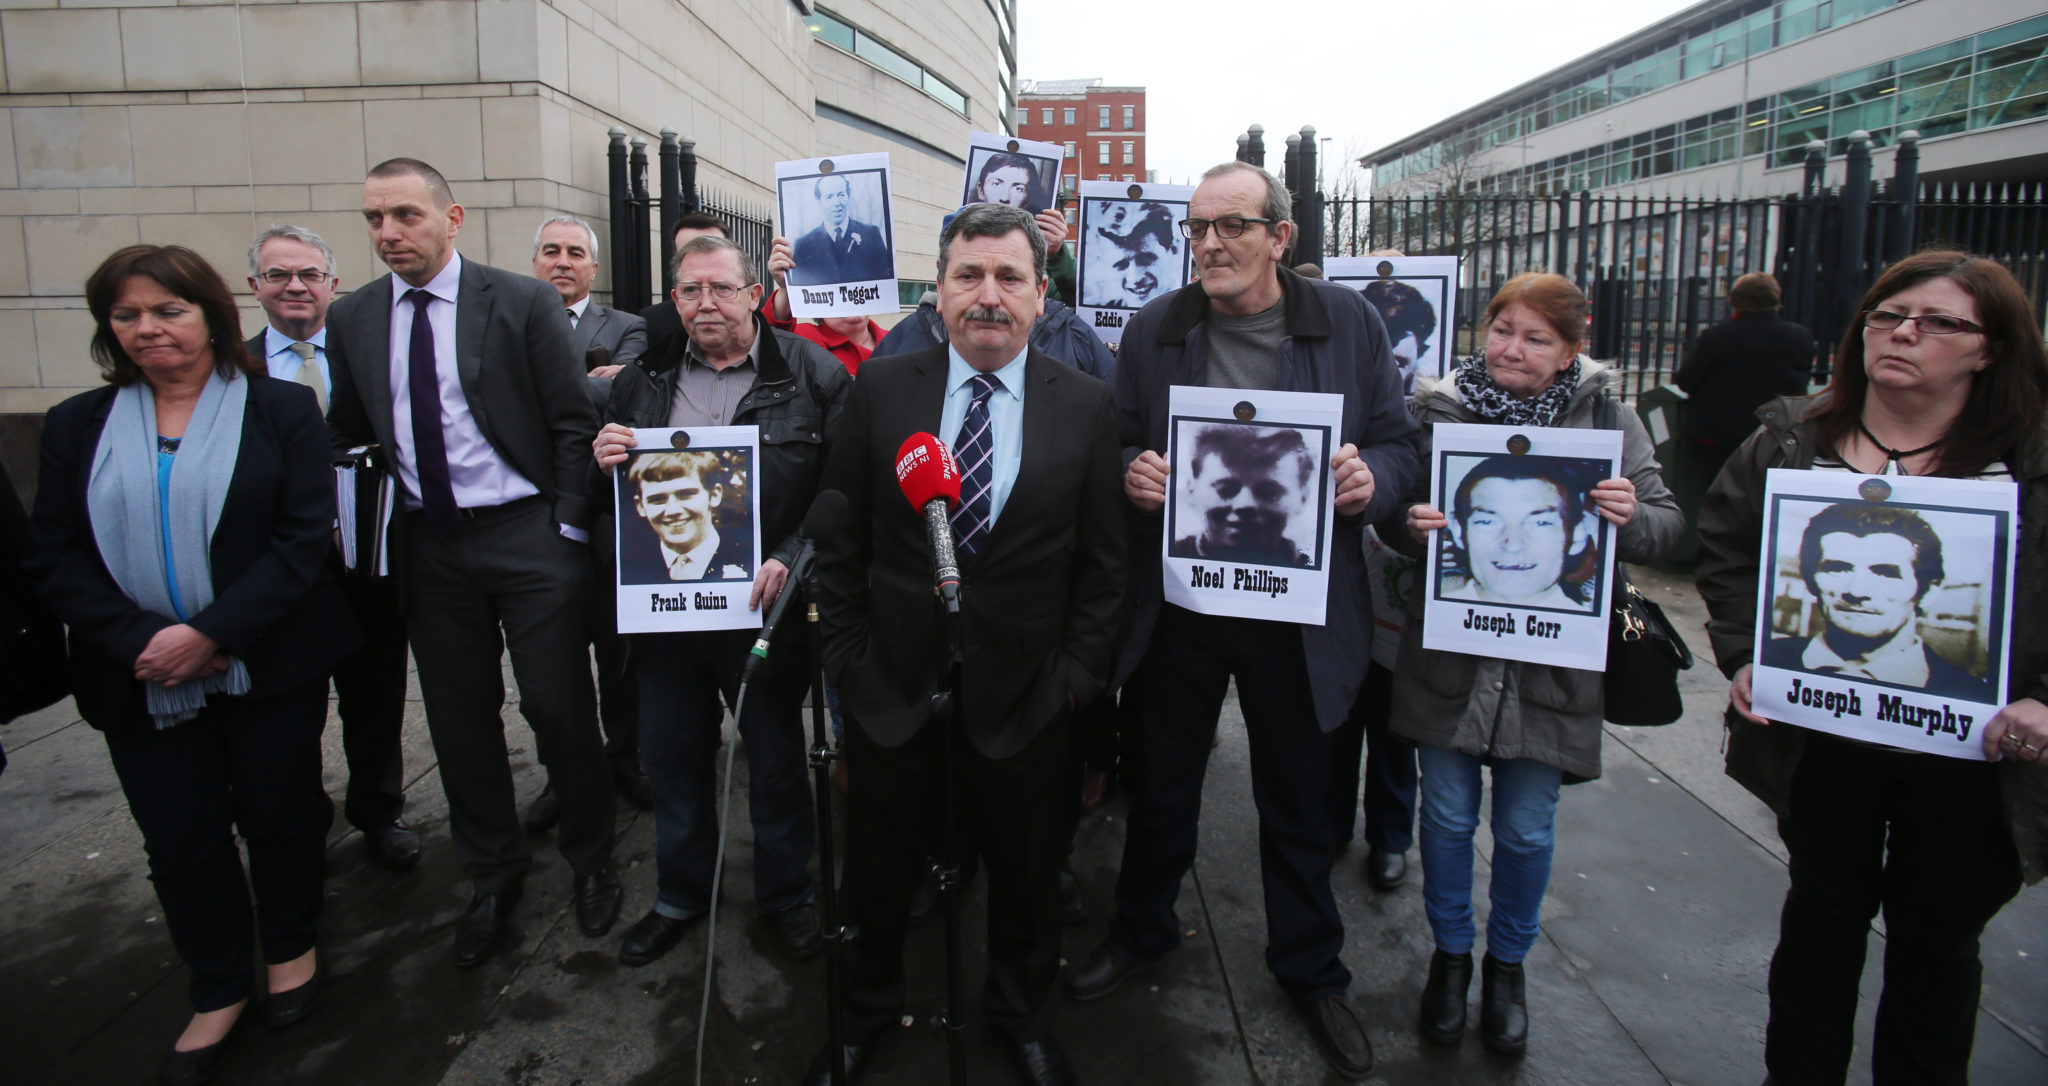 John Teggart (centre) stands with fellow campaigners outside Laganside Courts in Belfast in January 2016.